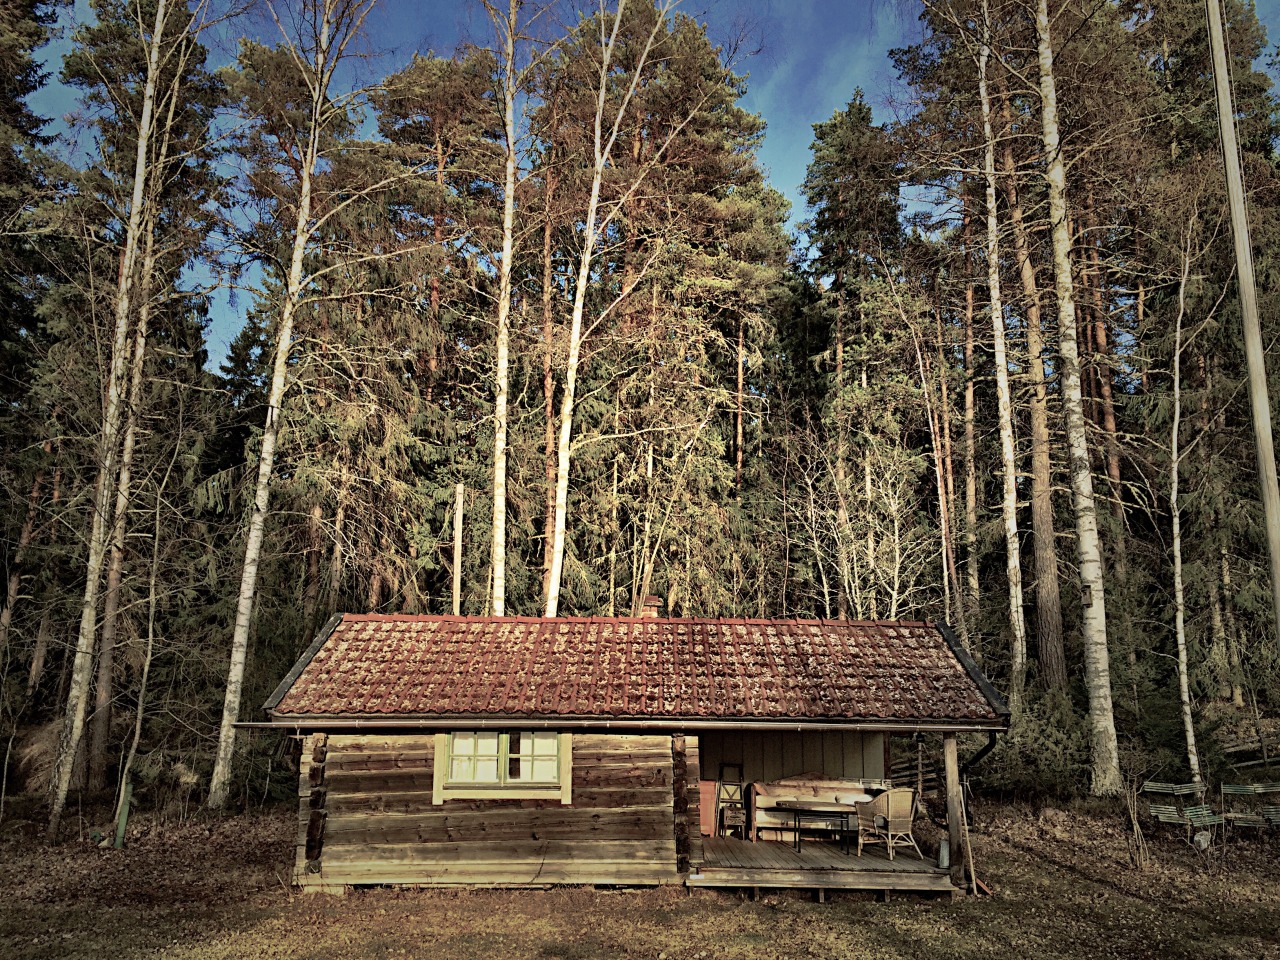 Log cabin in Lake Runn, Sweden.Contributed by Olle Nordell.